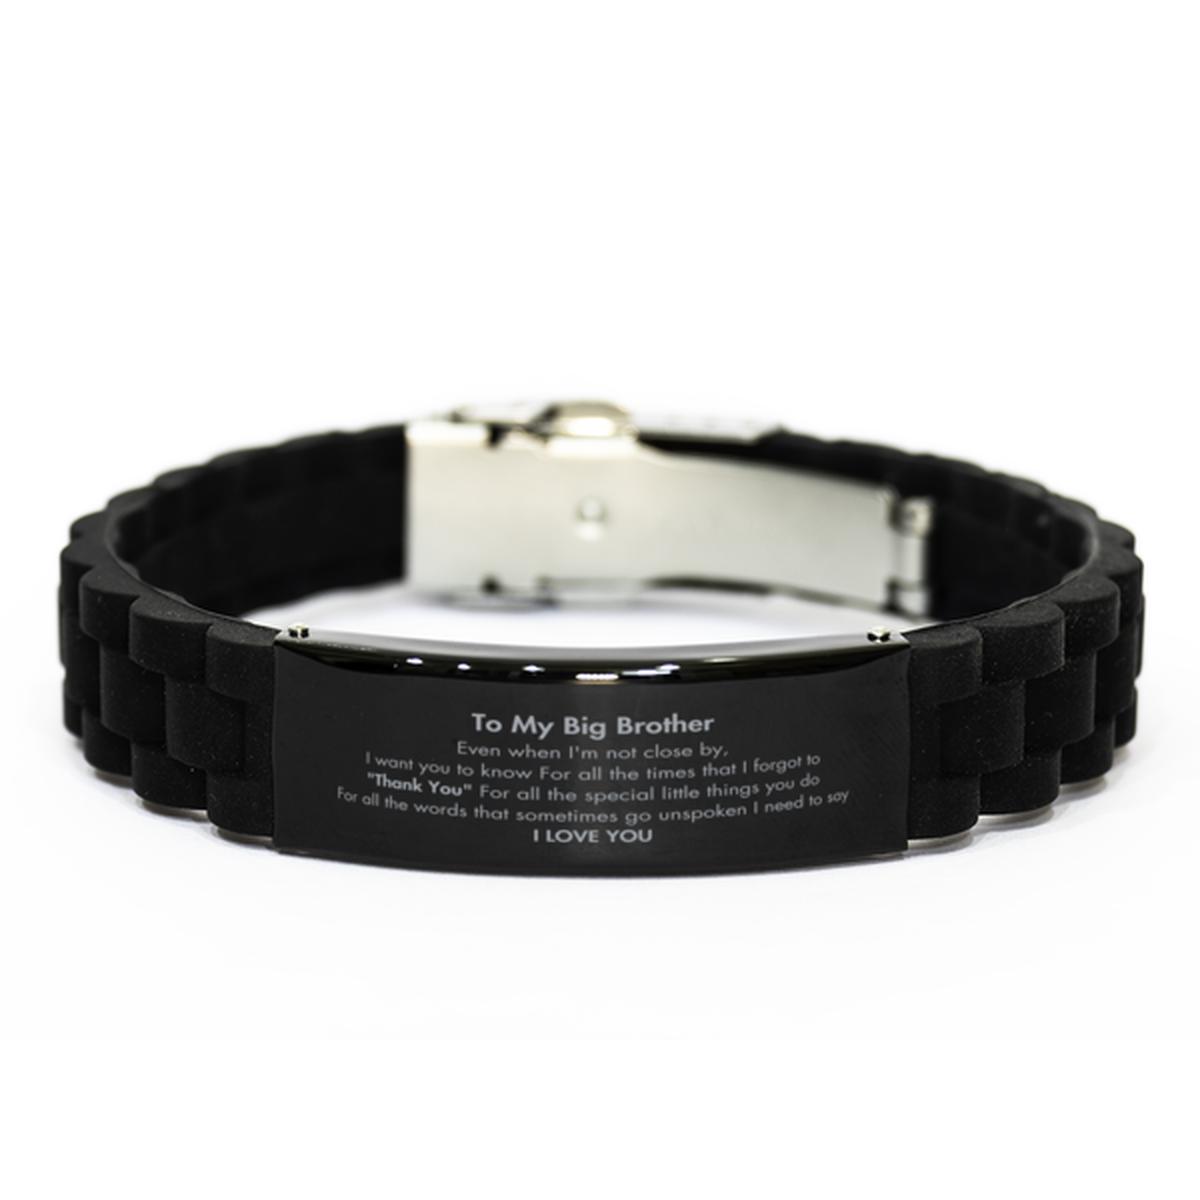 Thank You Gifts for Big Brother, Keepsake Black Glidelock Clasp Bracelet Gifts for Big Brother Birthday Mother's day Father's Day Big Brother For all the words That sometimes go unspoken I need to say I LOVE YOU